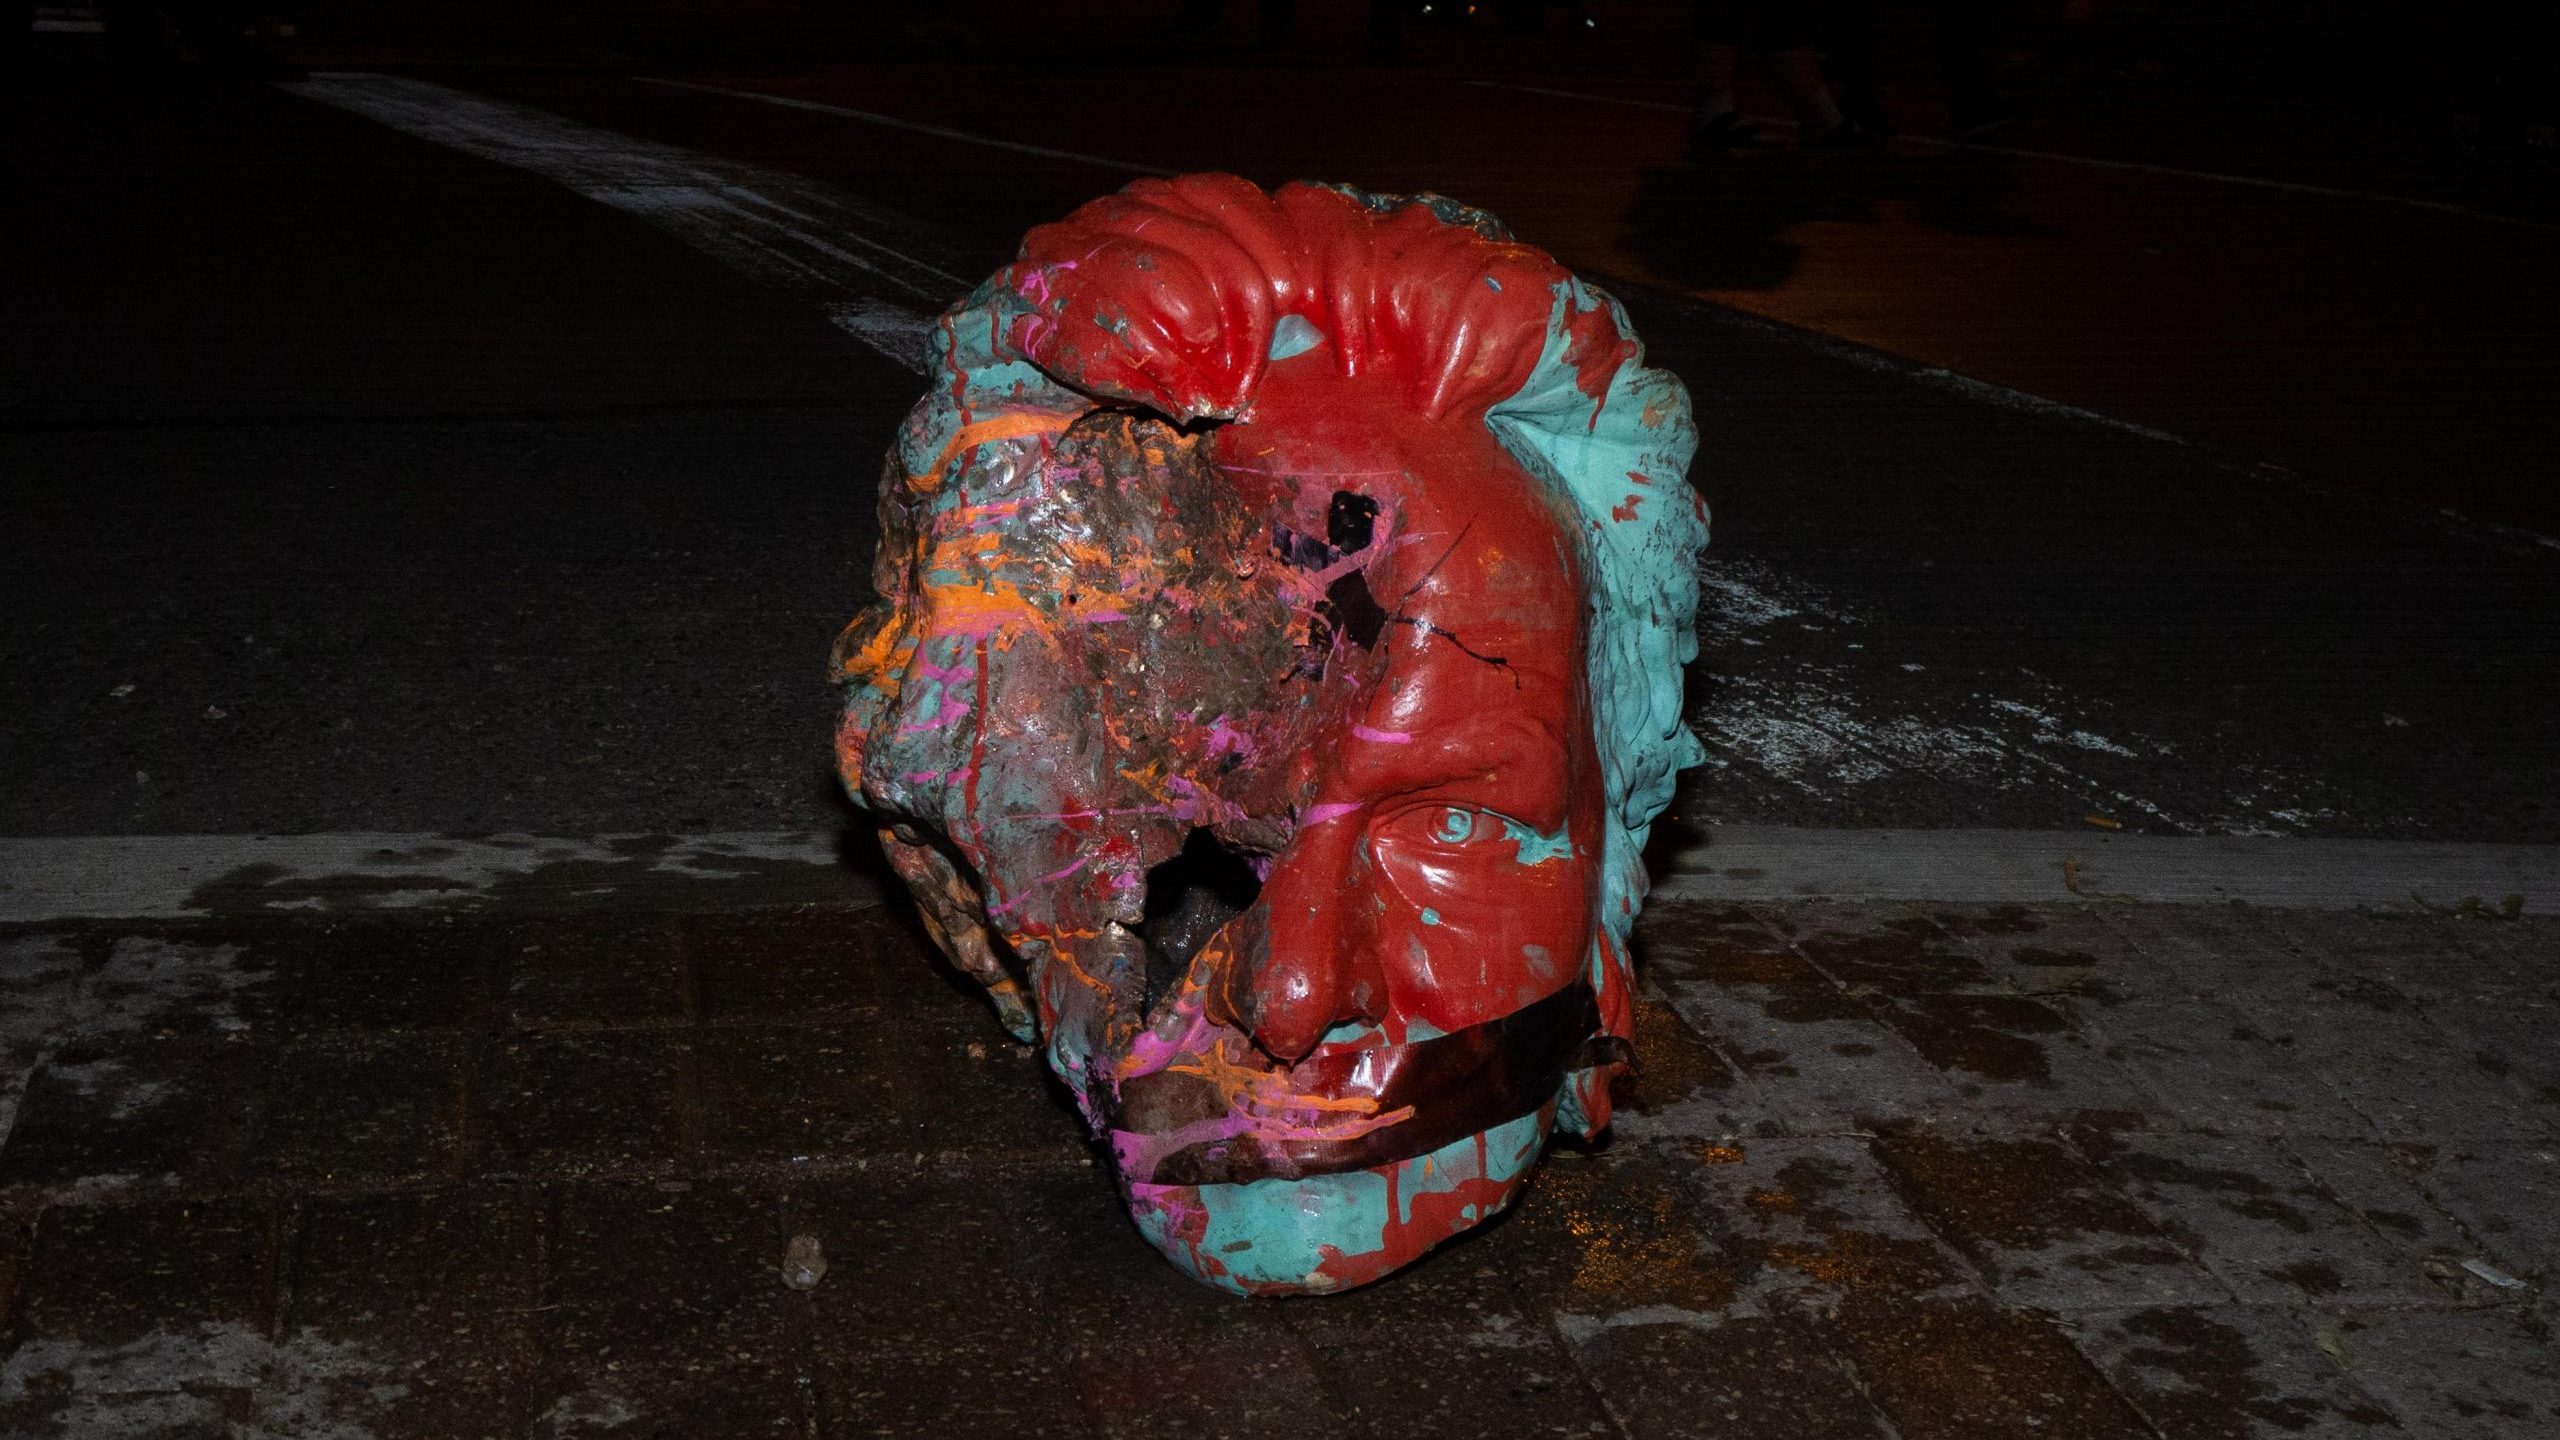 The decapitated head of the Egerton Ryerson statue sitting on the sidewalk with tape over its mouth. The side of the face is bashed in and the head is covered in paint.